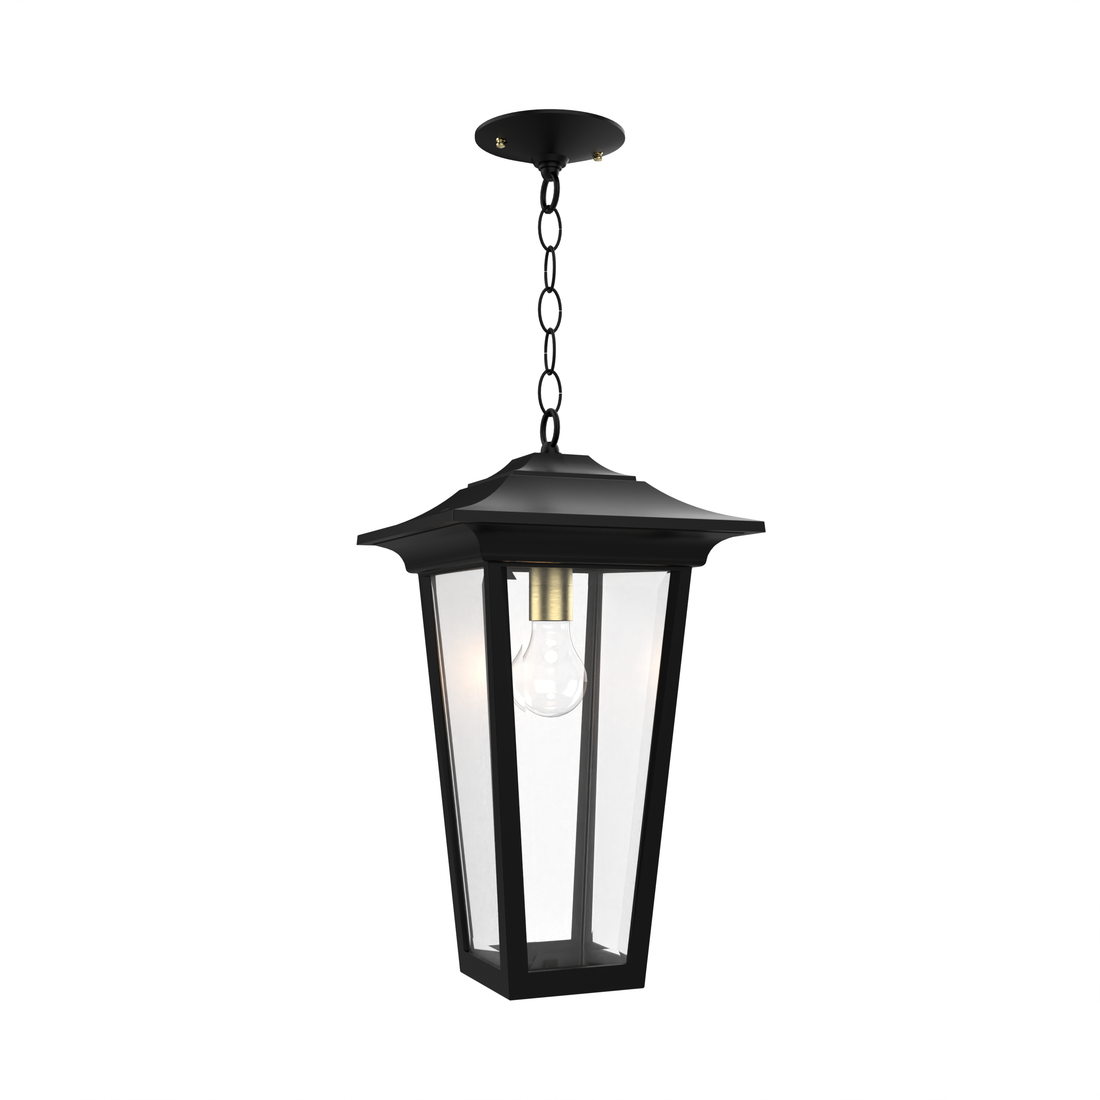 Orleans - Ceiling mounting with chain open bottom medium format - 22850